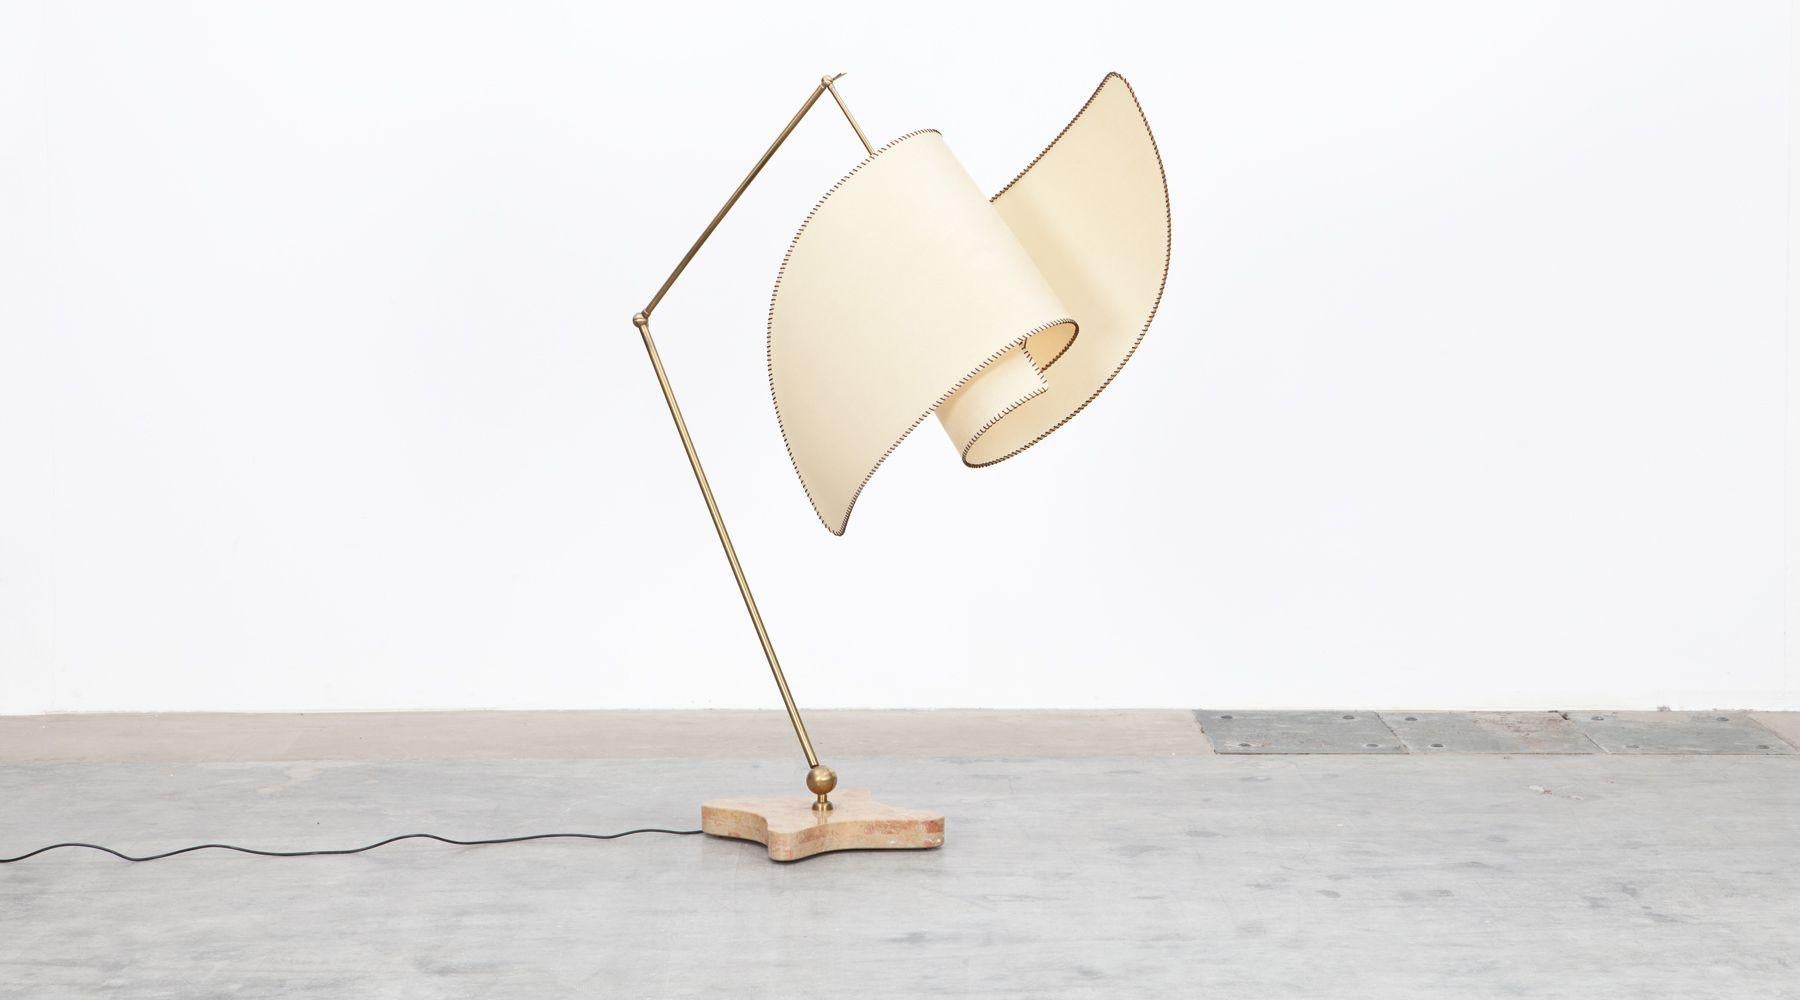 The design for this adjustable floor lamp was created by Carlo Mollino in 1947. This re-edition was made in 2016 by Galleria Colombari. Parchment shade supported by brass arm on polished marble base. The lamp is able to swivel 360 degrees by